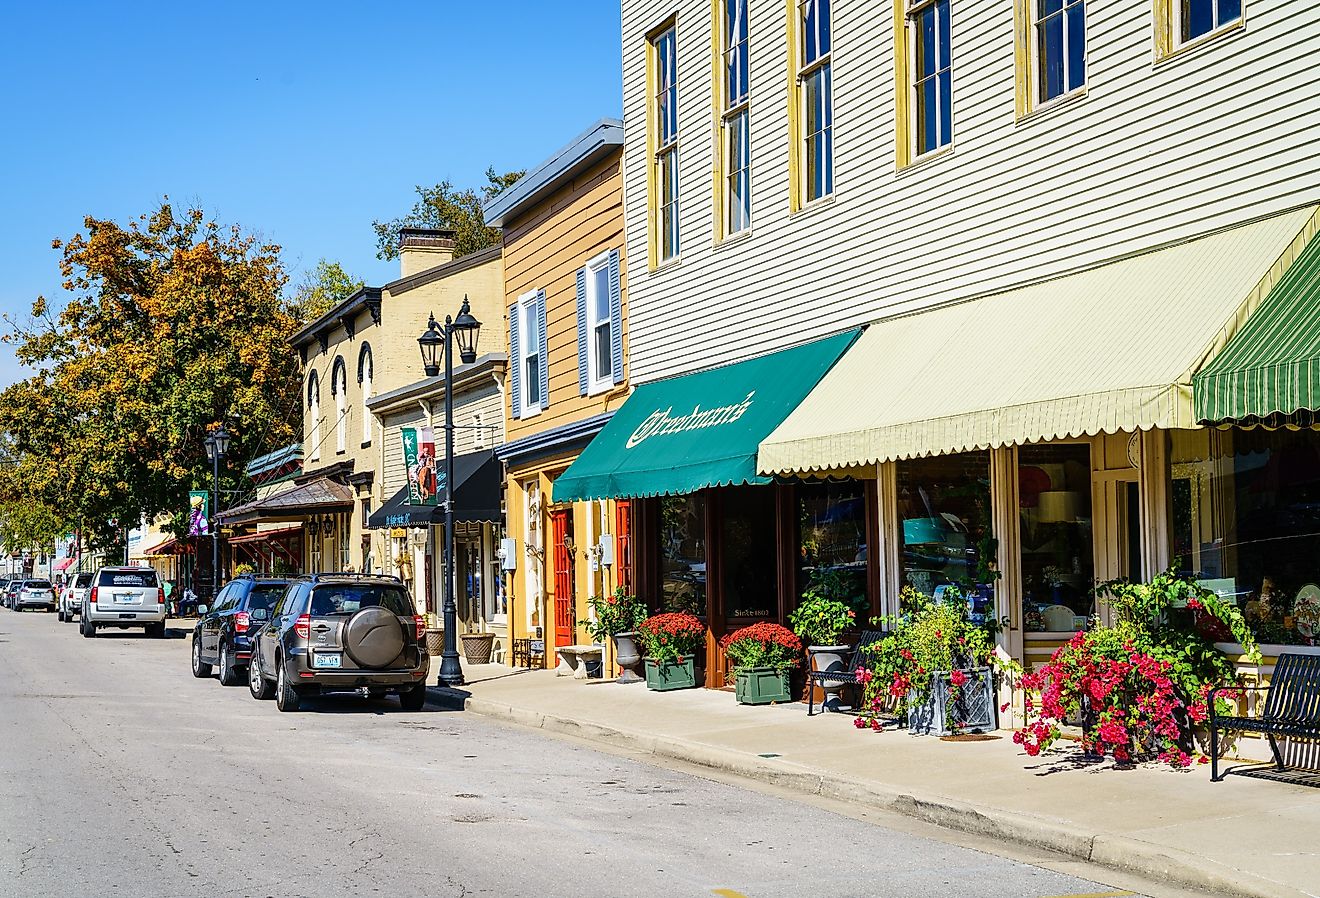 Midway, Kentucky's picturesque Main Street, is famous for its boutiques and restaurants. Image credit Alexey Stiop via Shutterstock